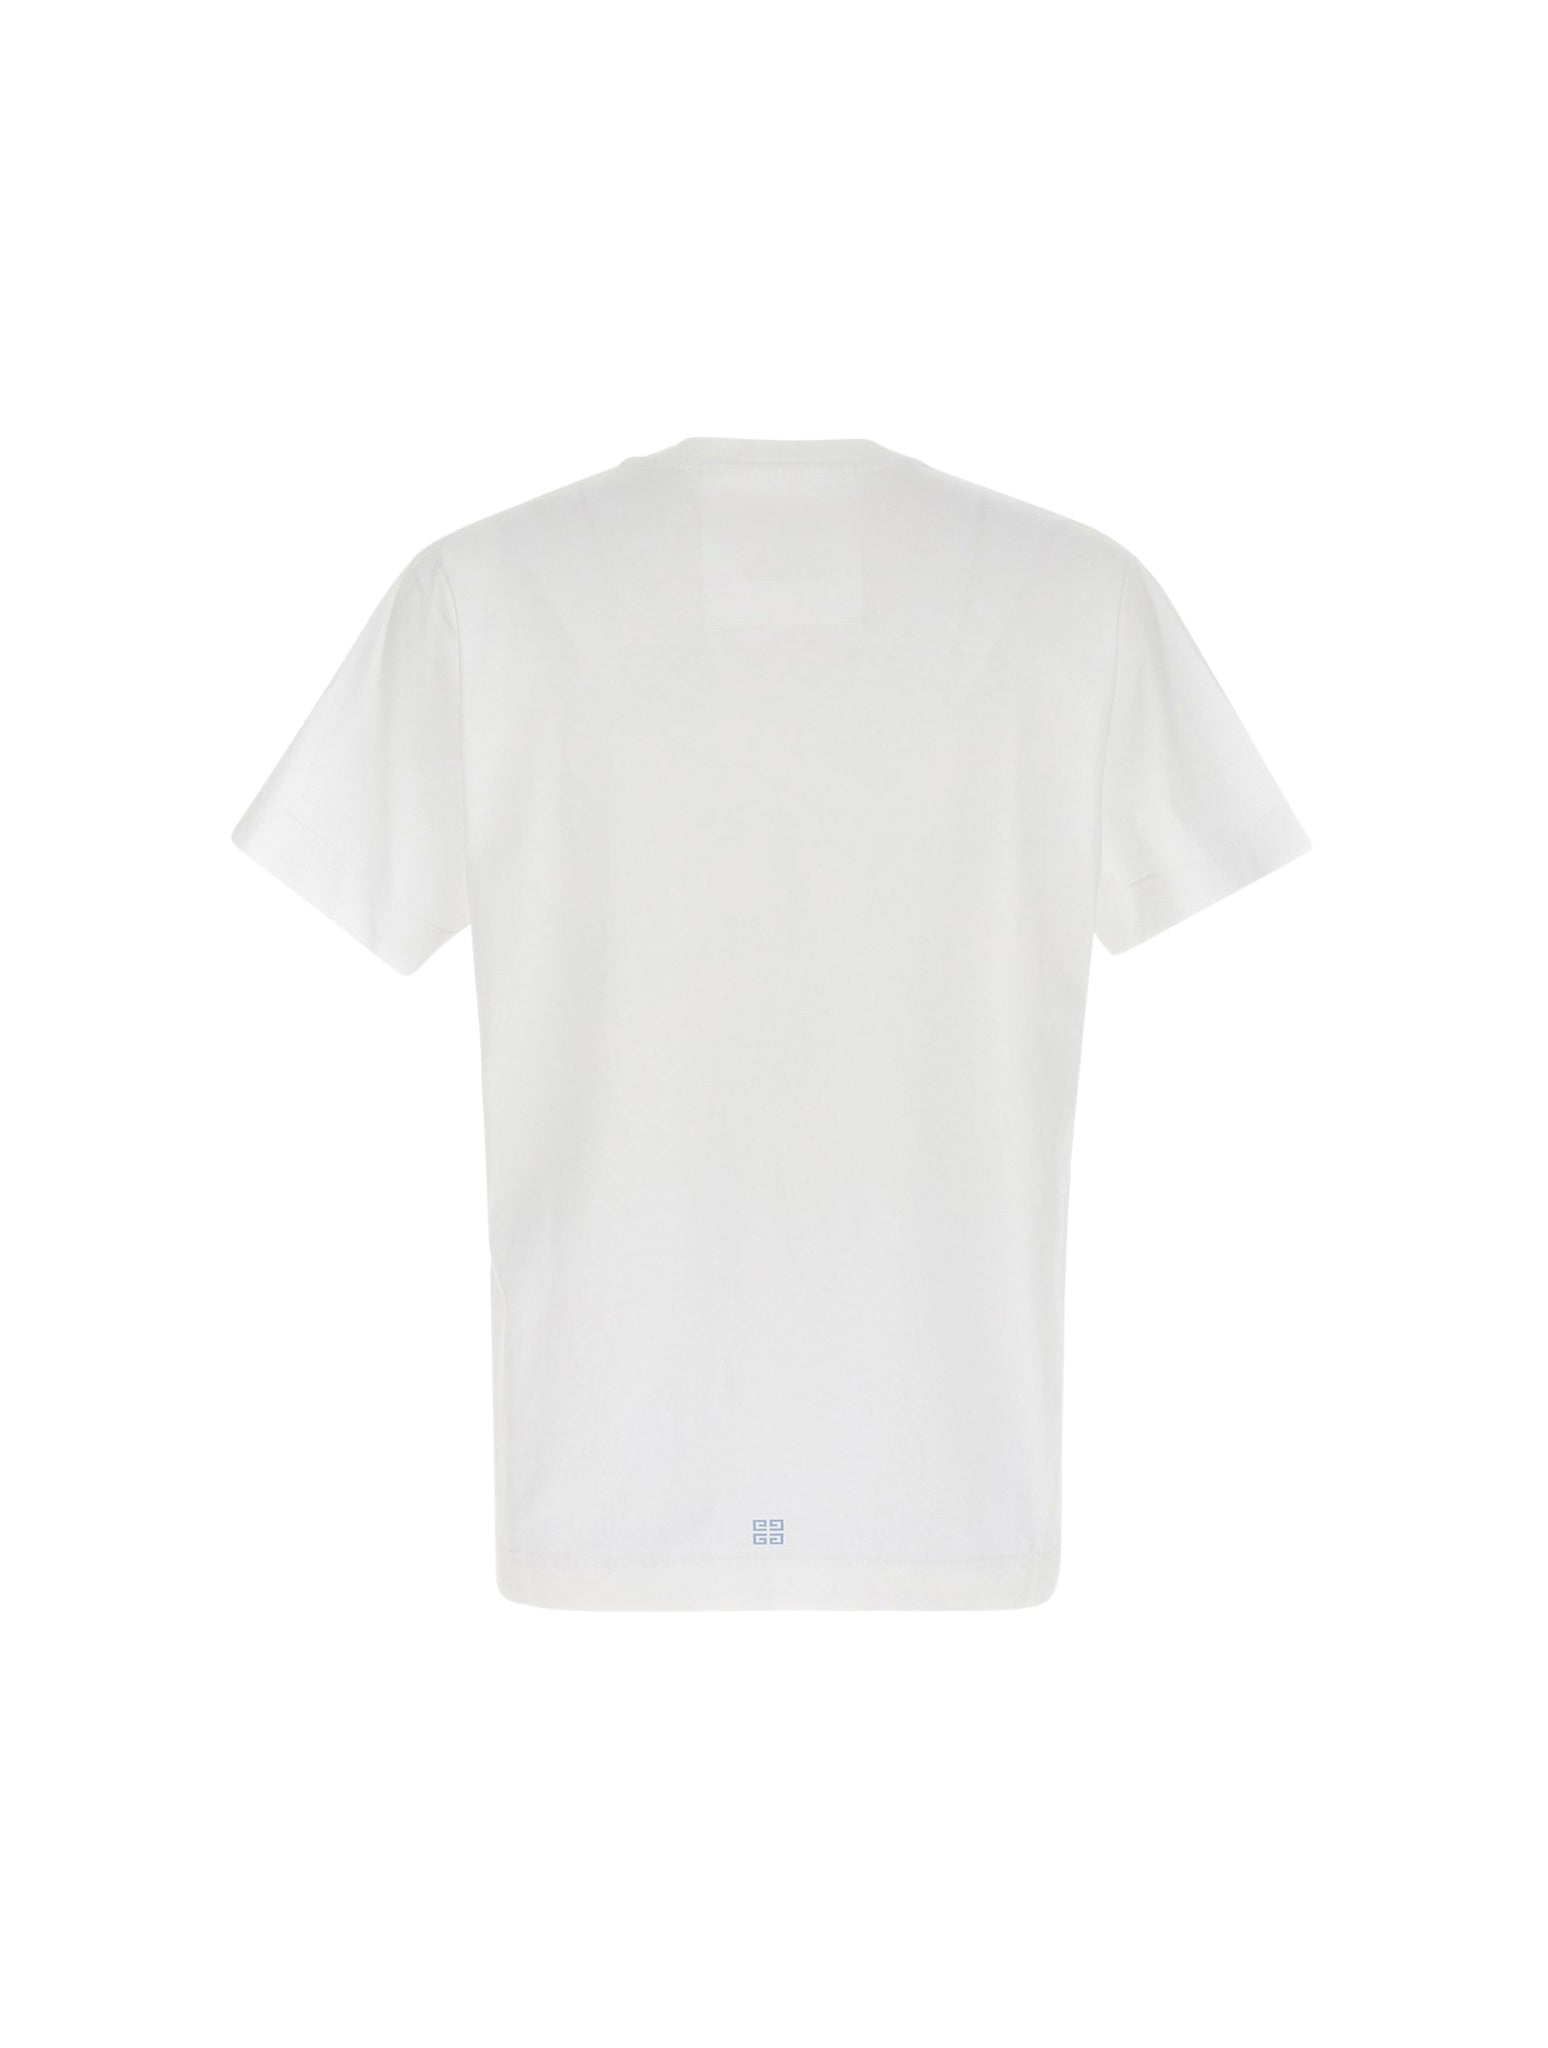 T-SHIRT IN COTONE STAMPA LOGO